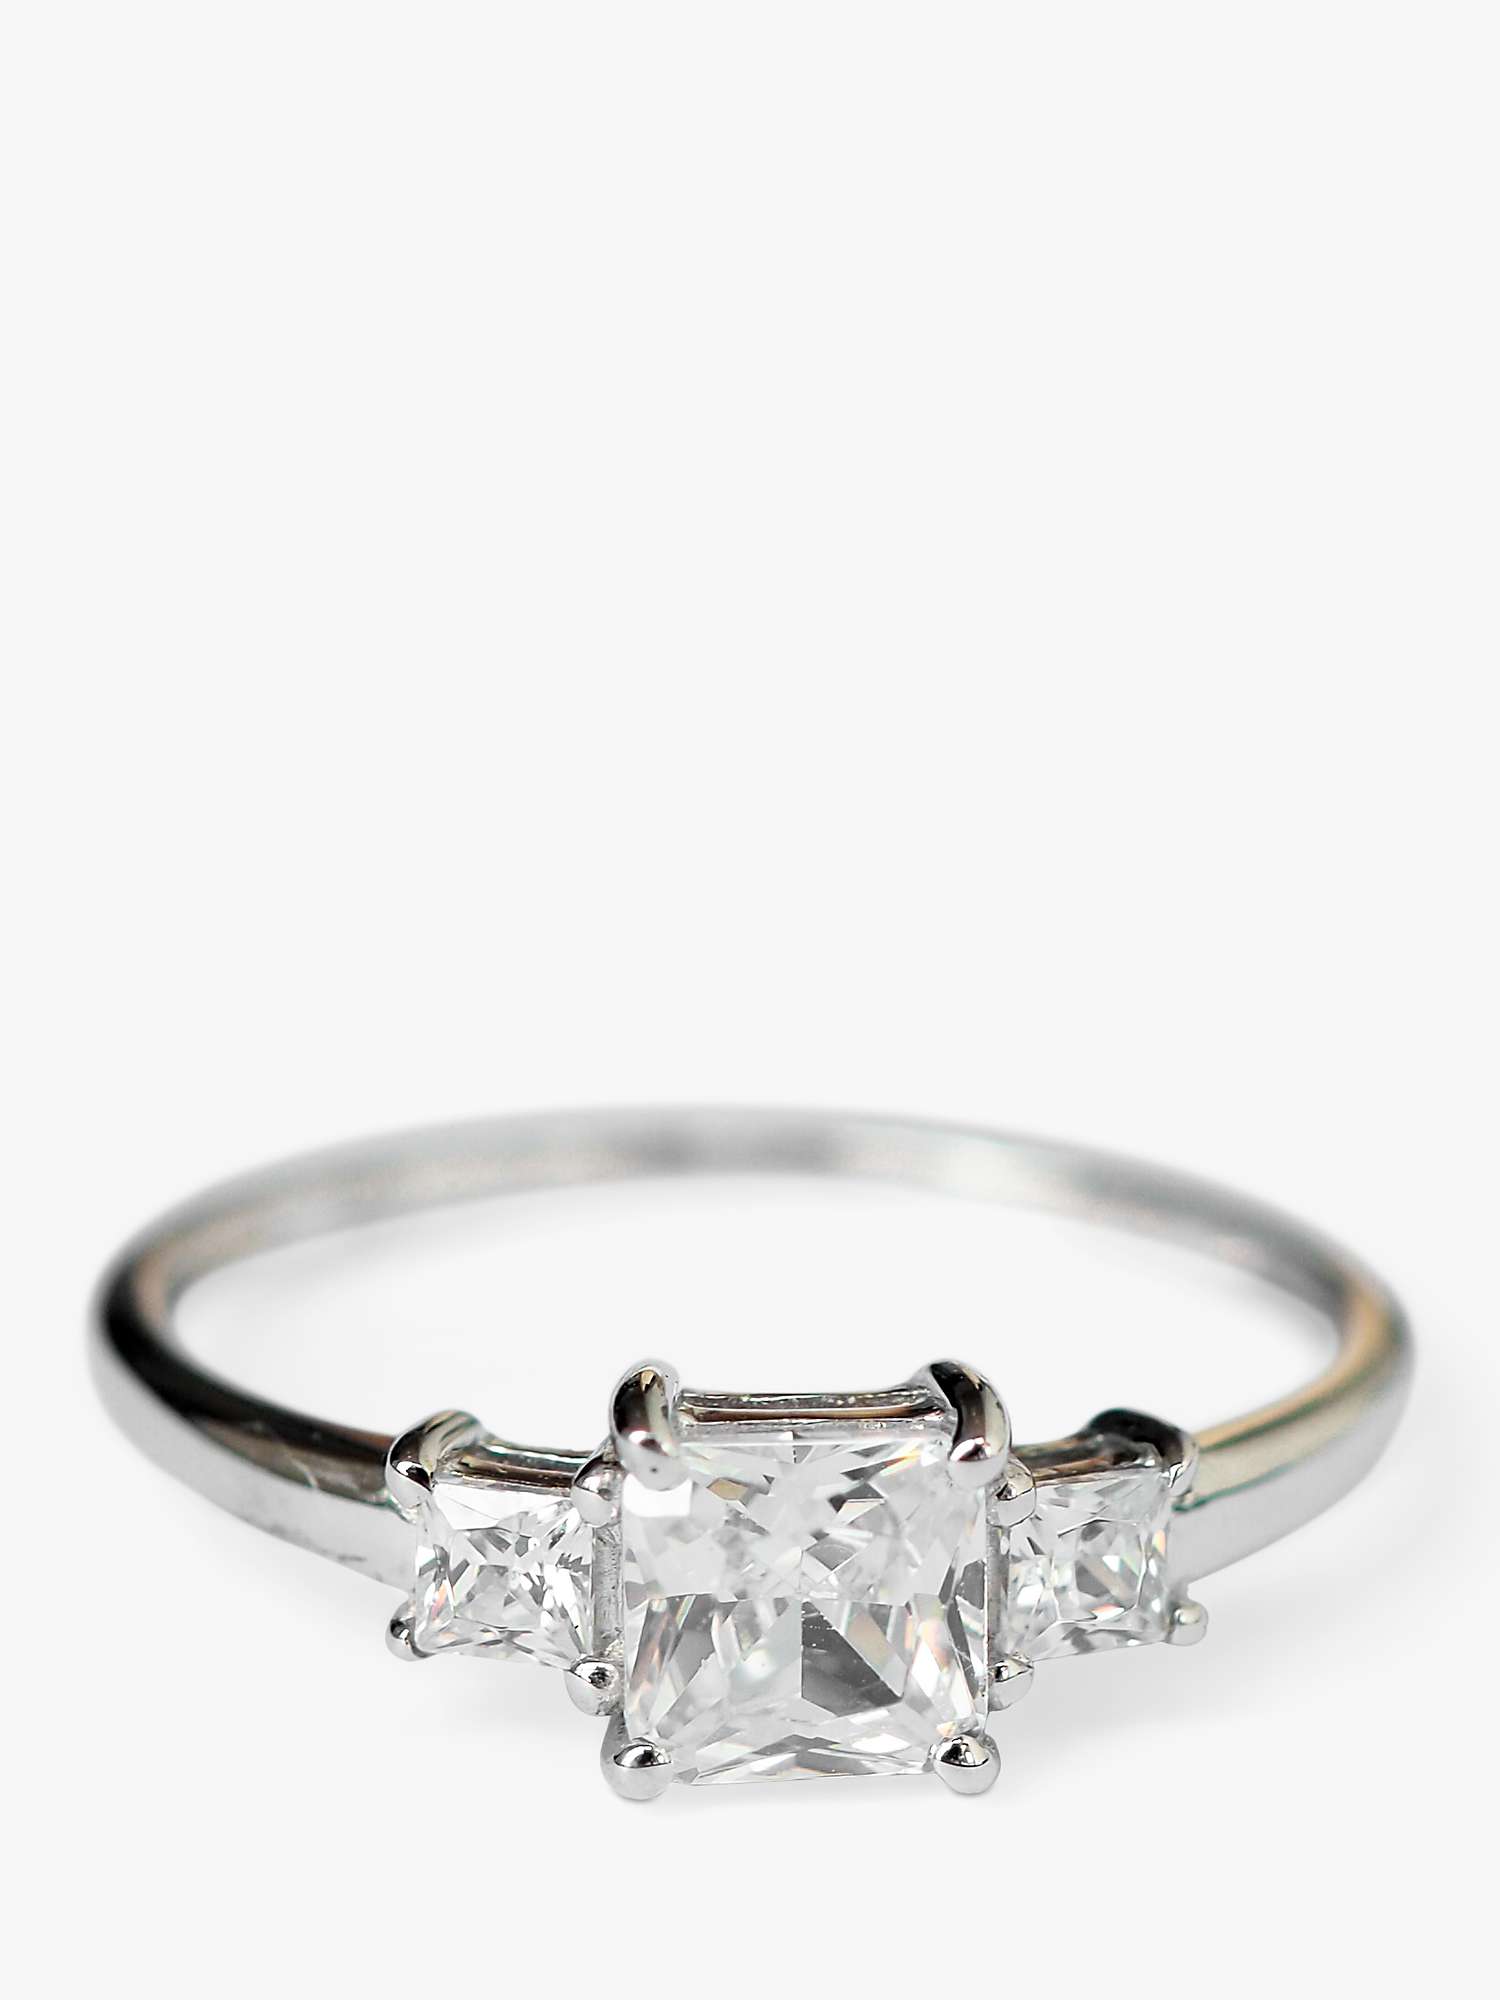 Buy L & T Heirlooms Second Hand 9ct White Gold Cubic Zirconia Ring Online at johnlewis.com